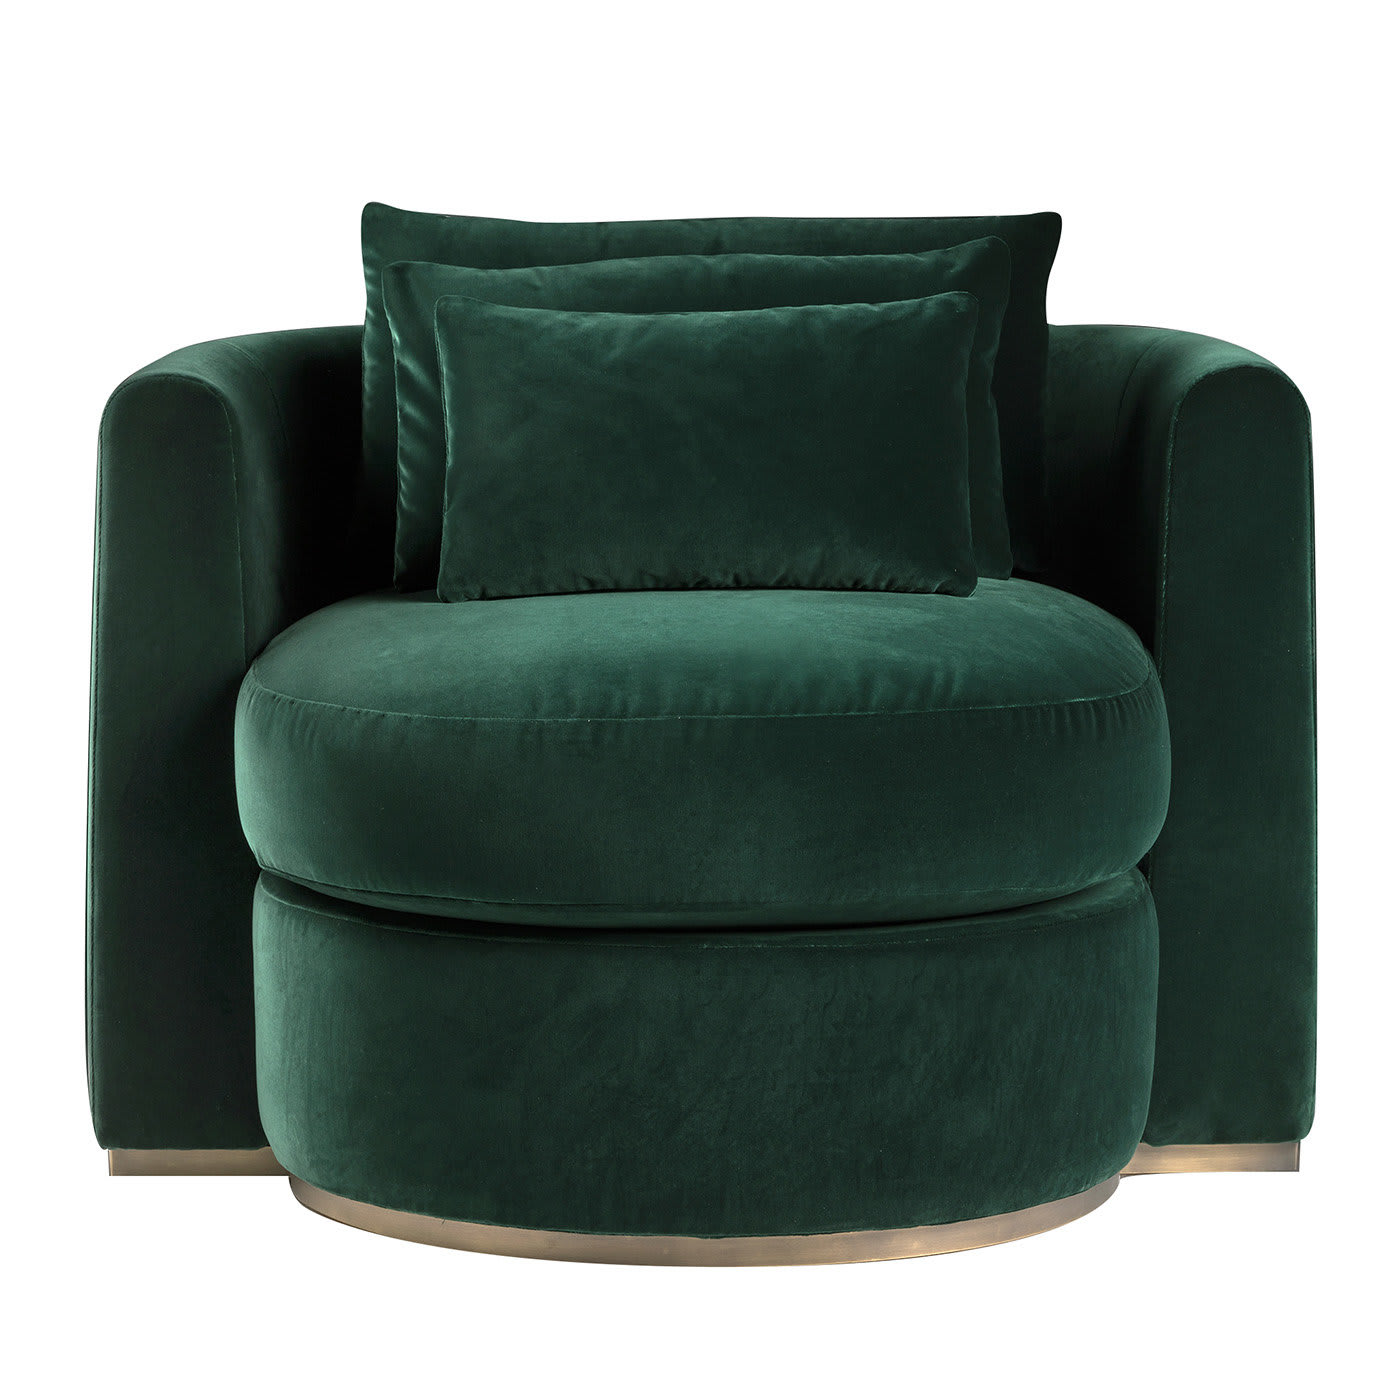 Silvana Armchair by Simone Ciarmoli and Miguel Queda - Annibale Colombo